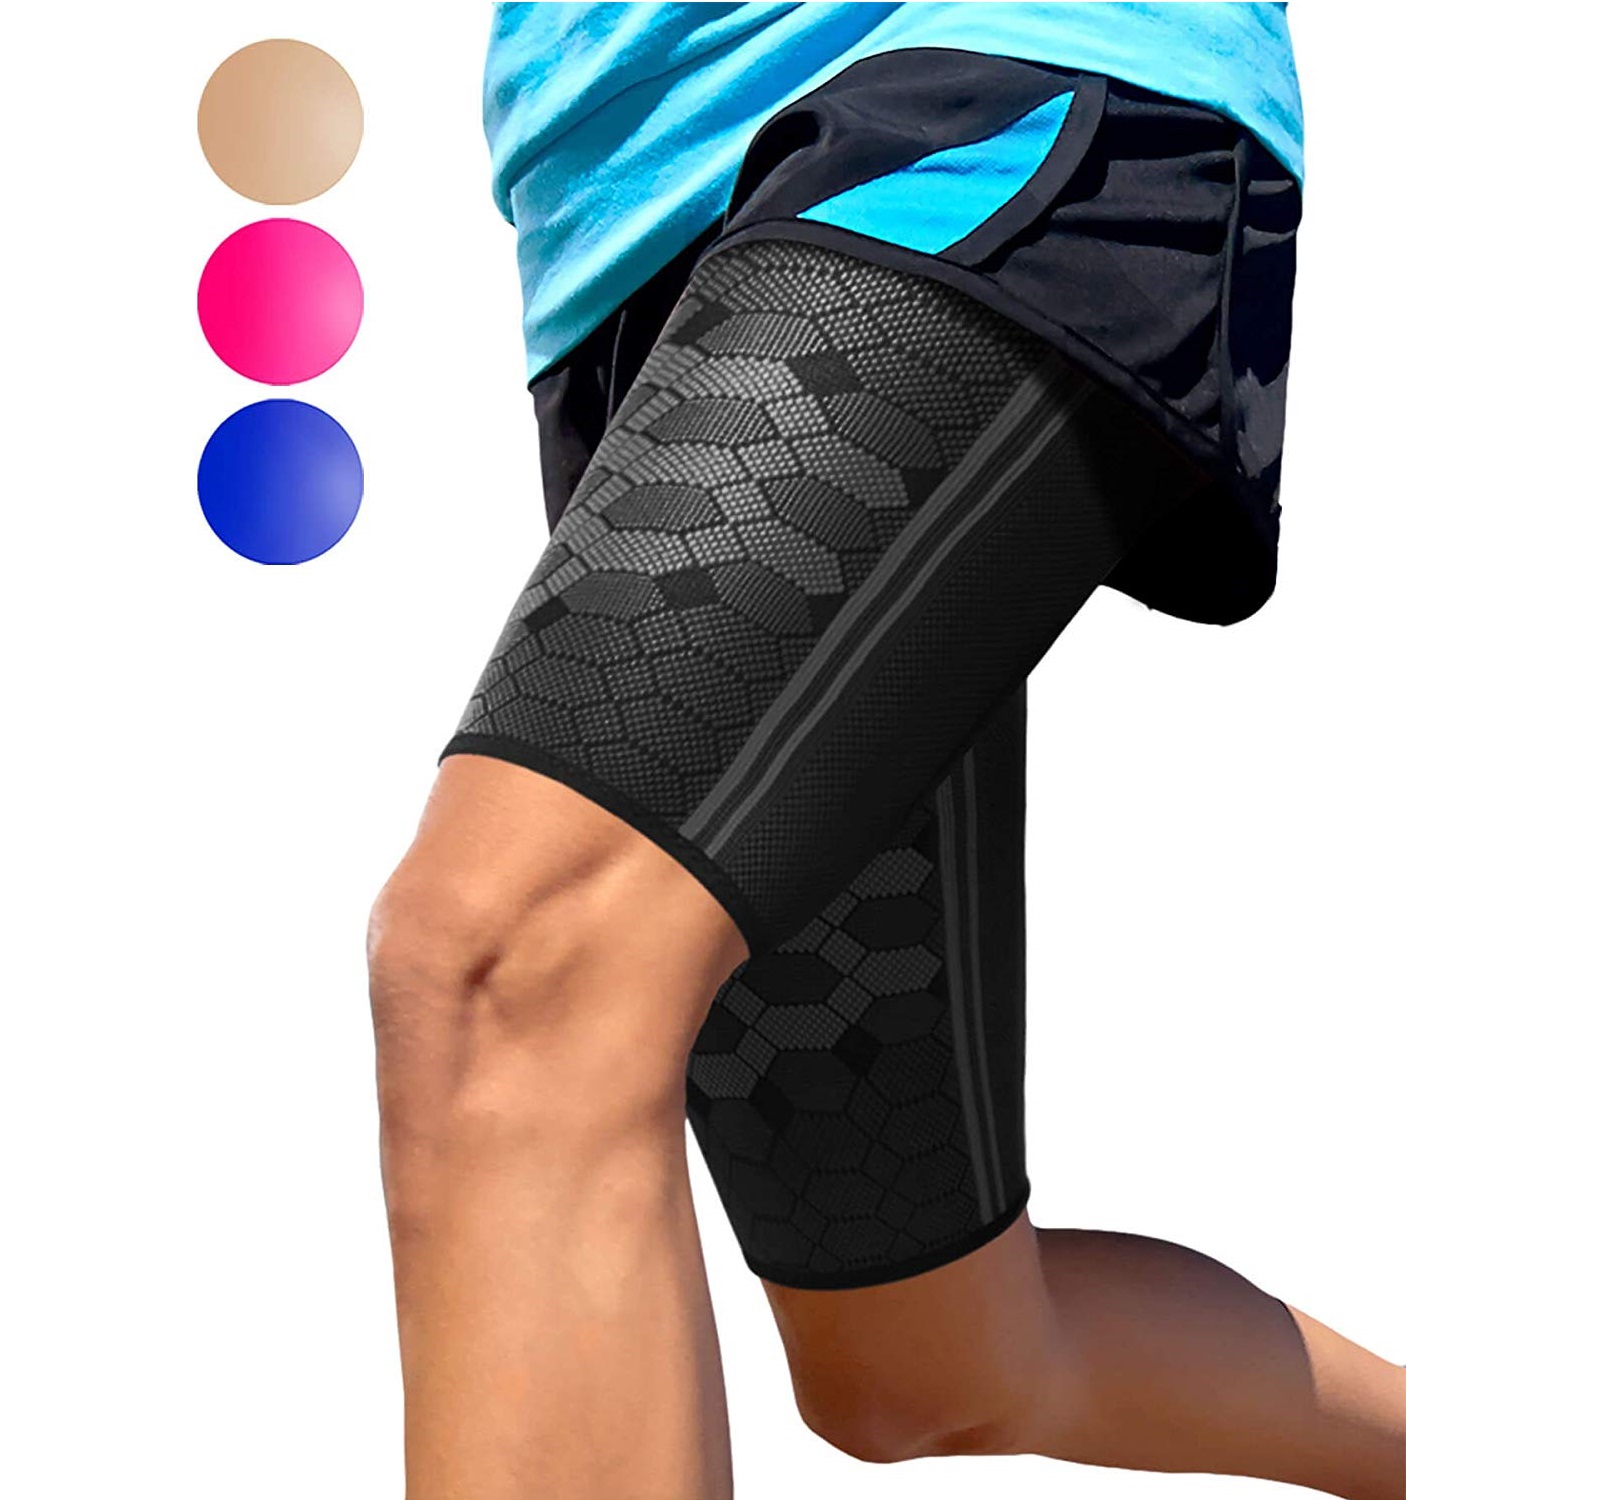 Thigh Compression Sleeves – Sparthos Instructions